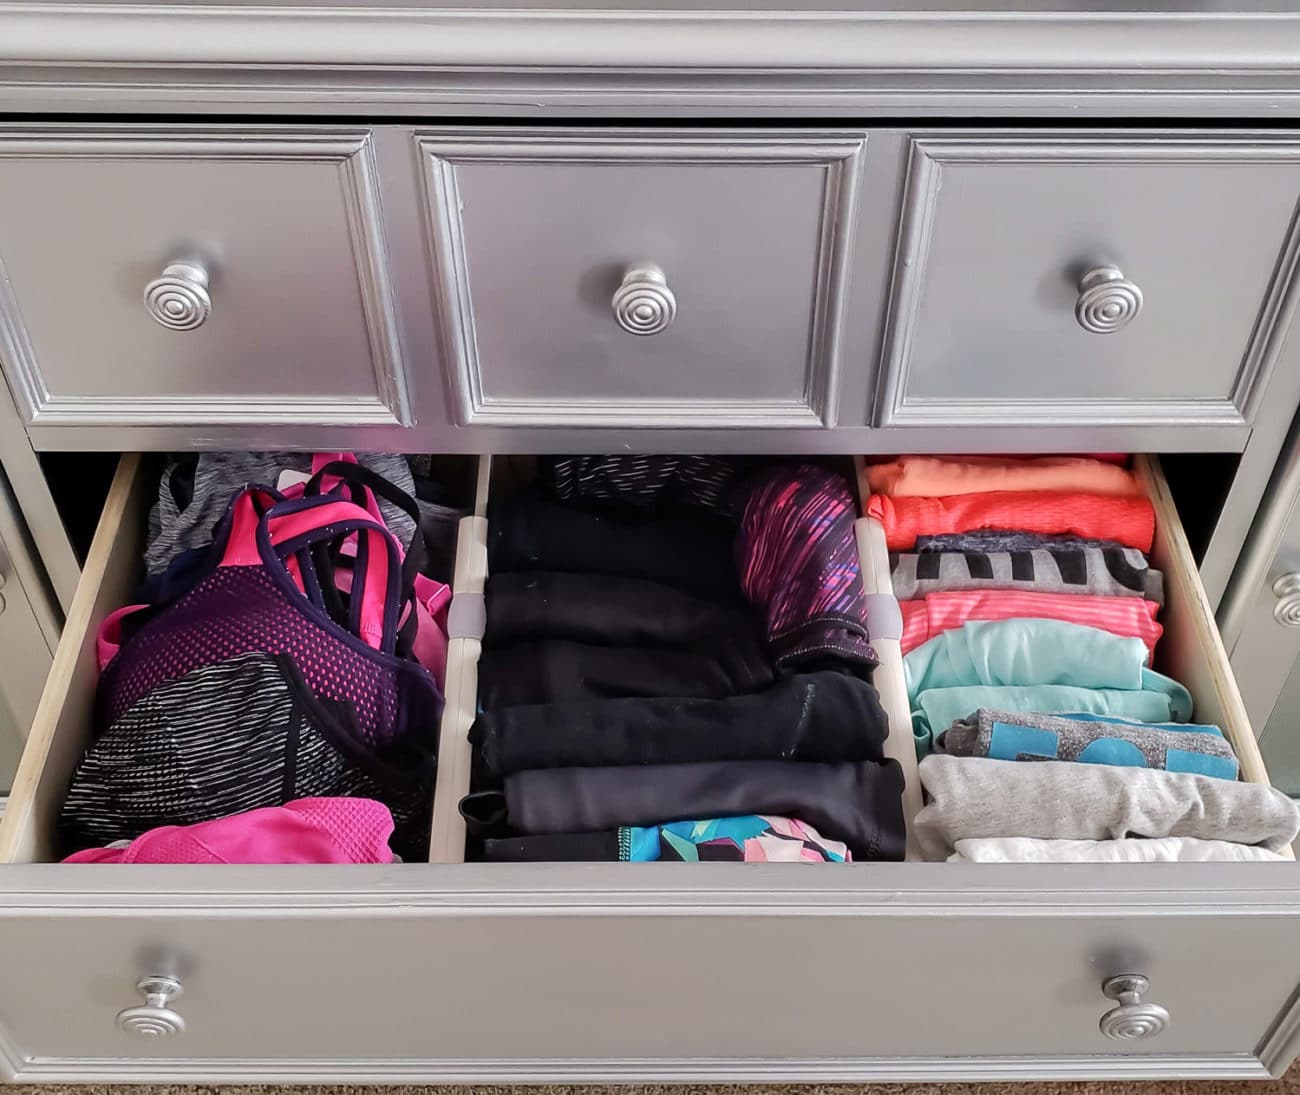 How To Organize Dresser Drawers, Should You Put A Dresser In Closet